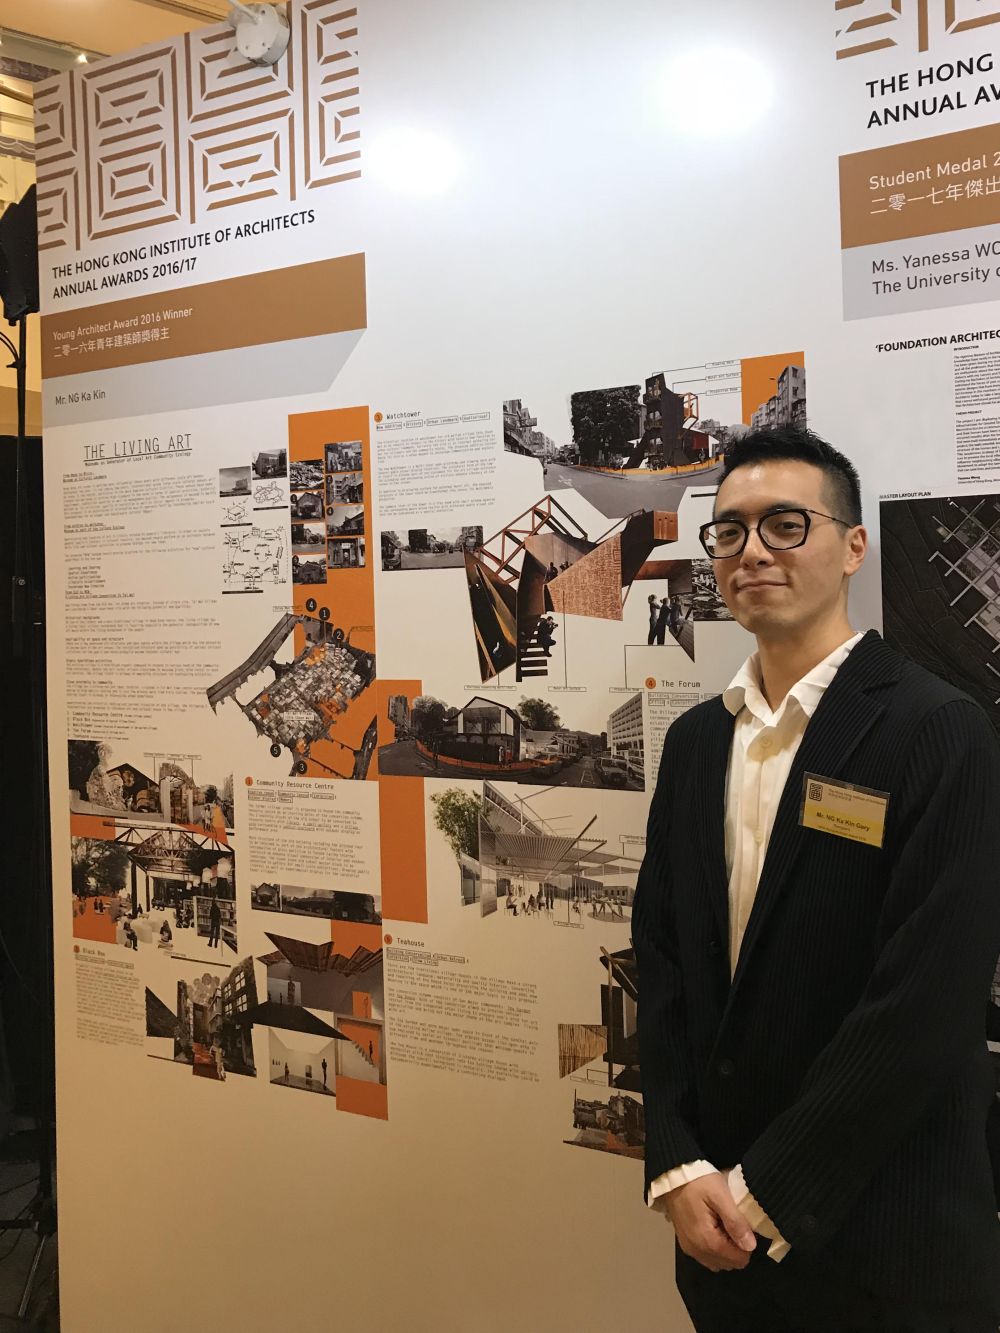 Mr Gary NG is the previous winner of the “Young Architect Award” of the Hong Kong Institute of Architects.